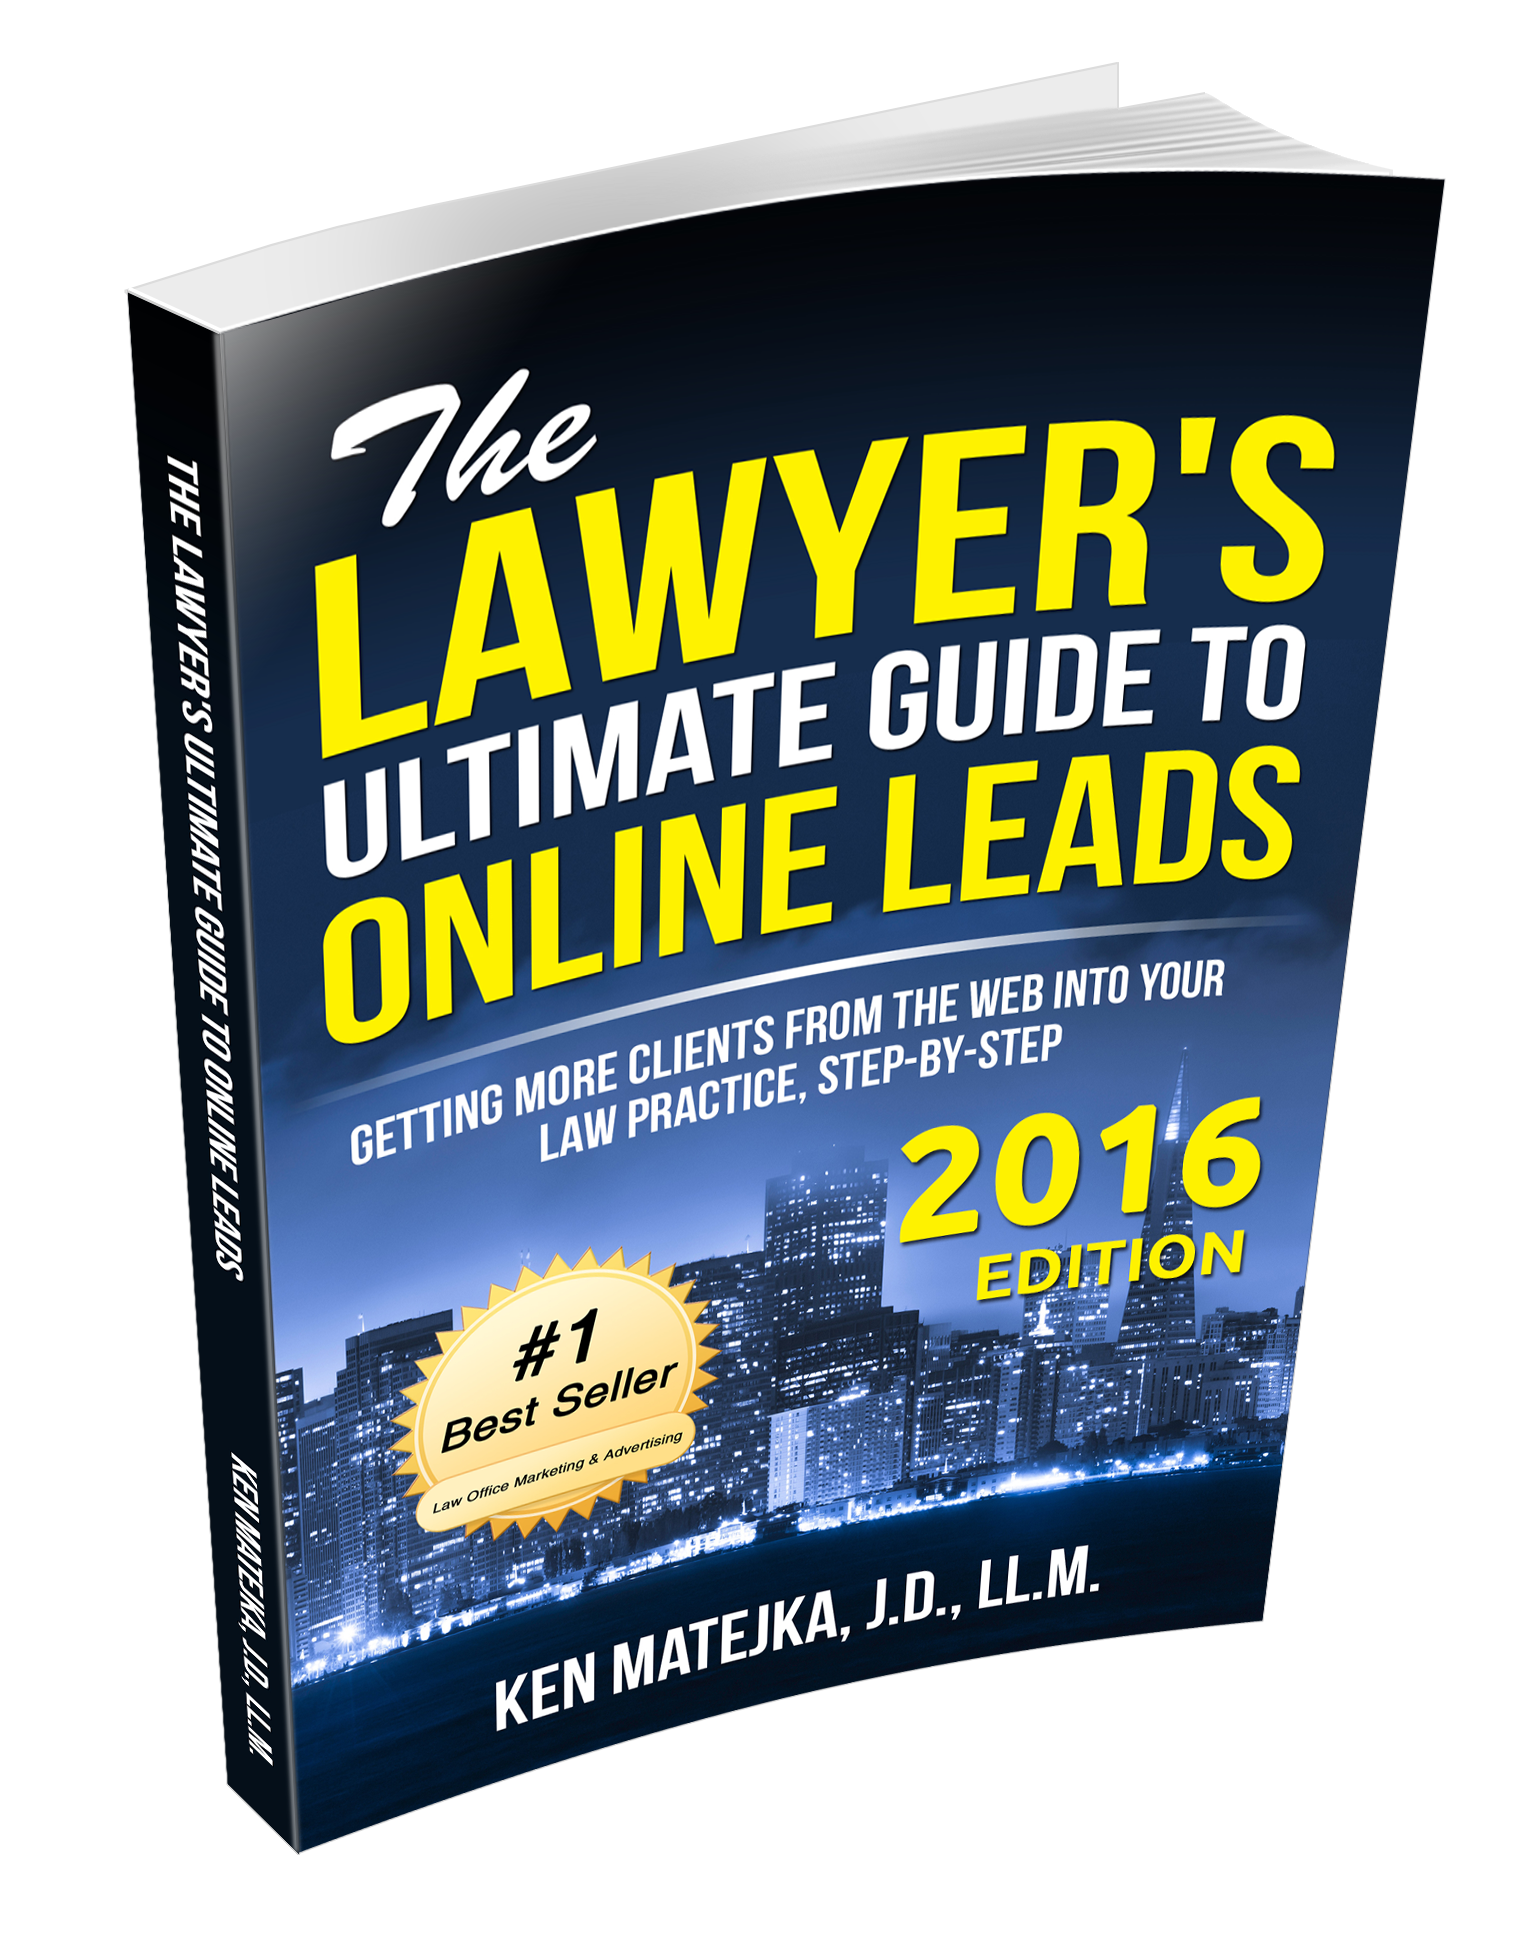 The Lawyer's Ultimate Guide to Online Leads 2016